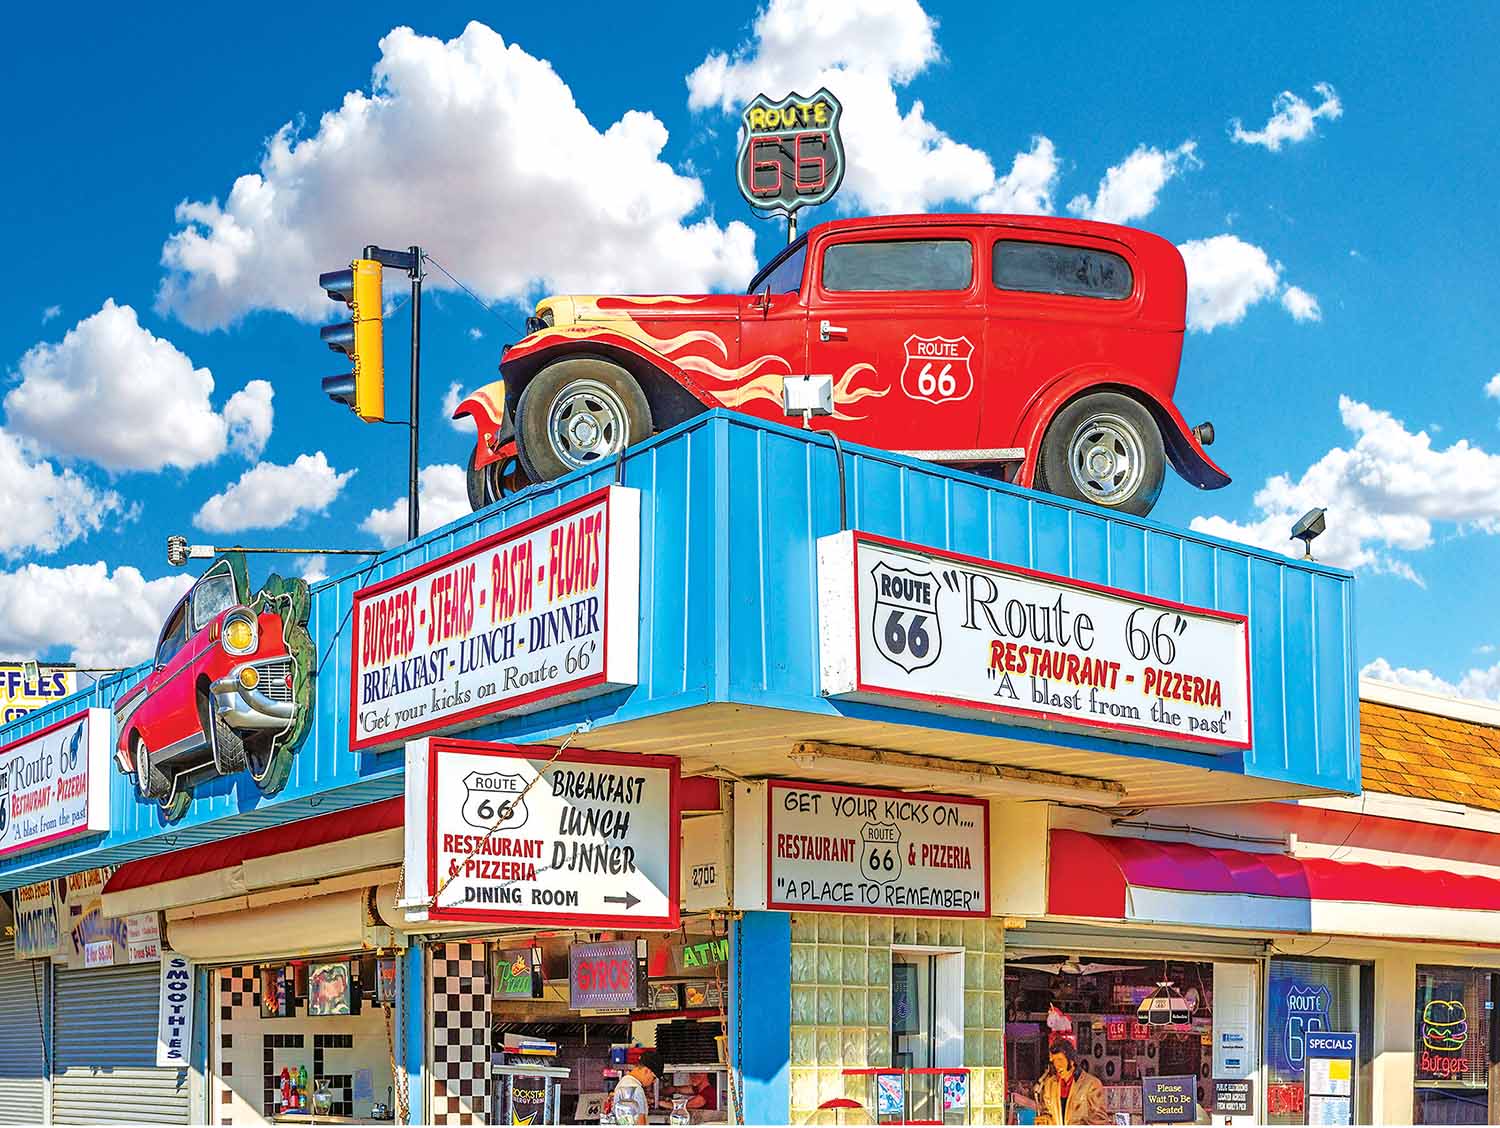 Colorluxe - Rt. 66 Restaurant, NJ Vehicles Jigsaw Puzzle